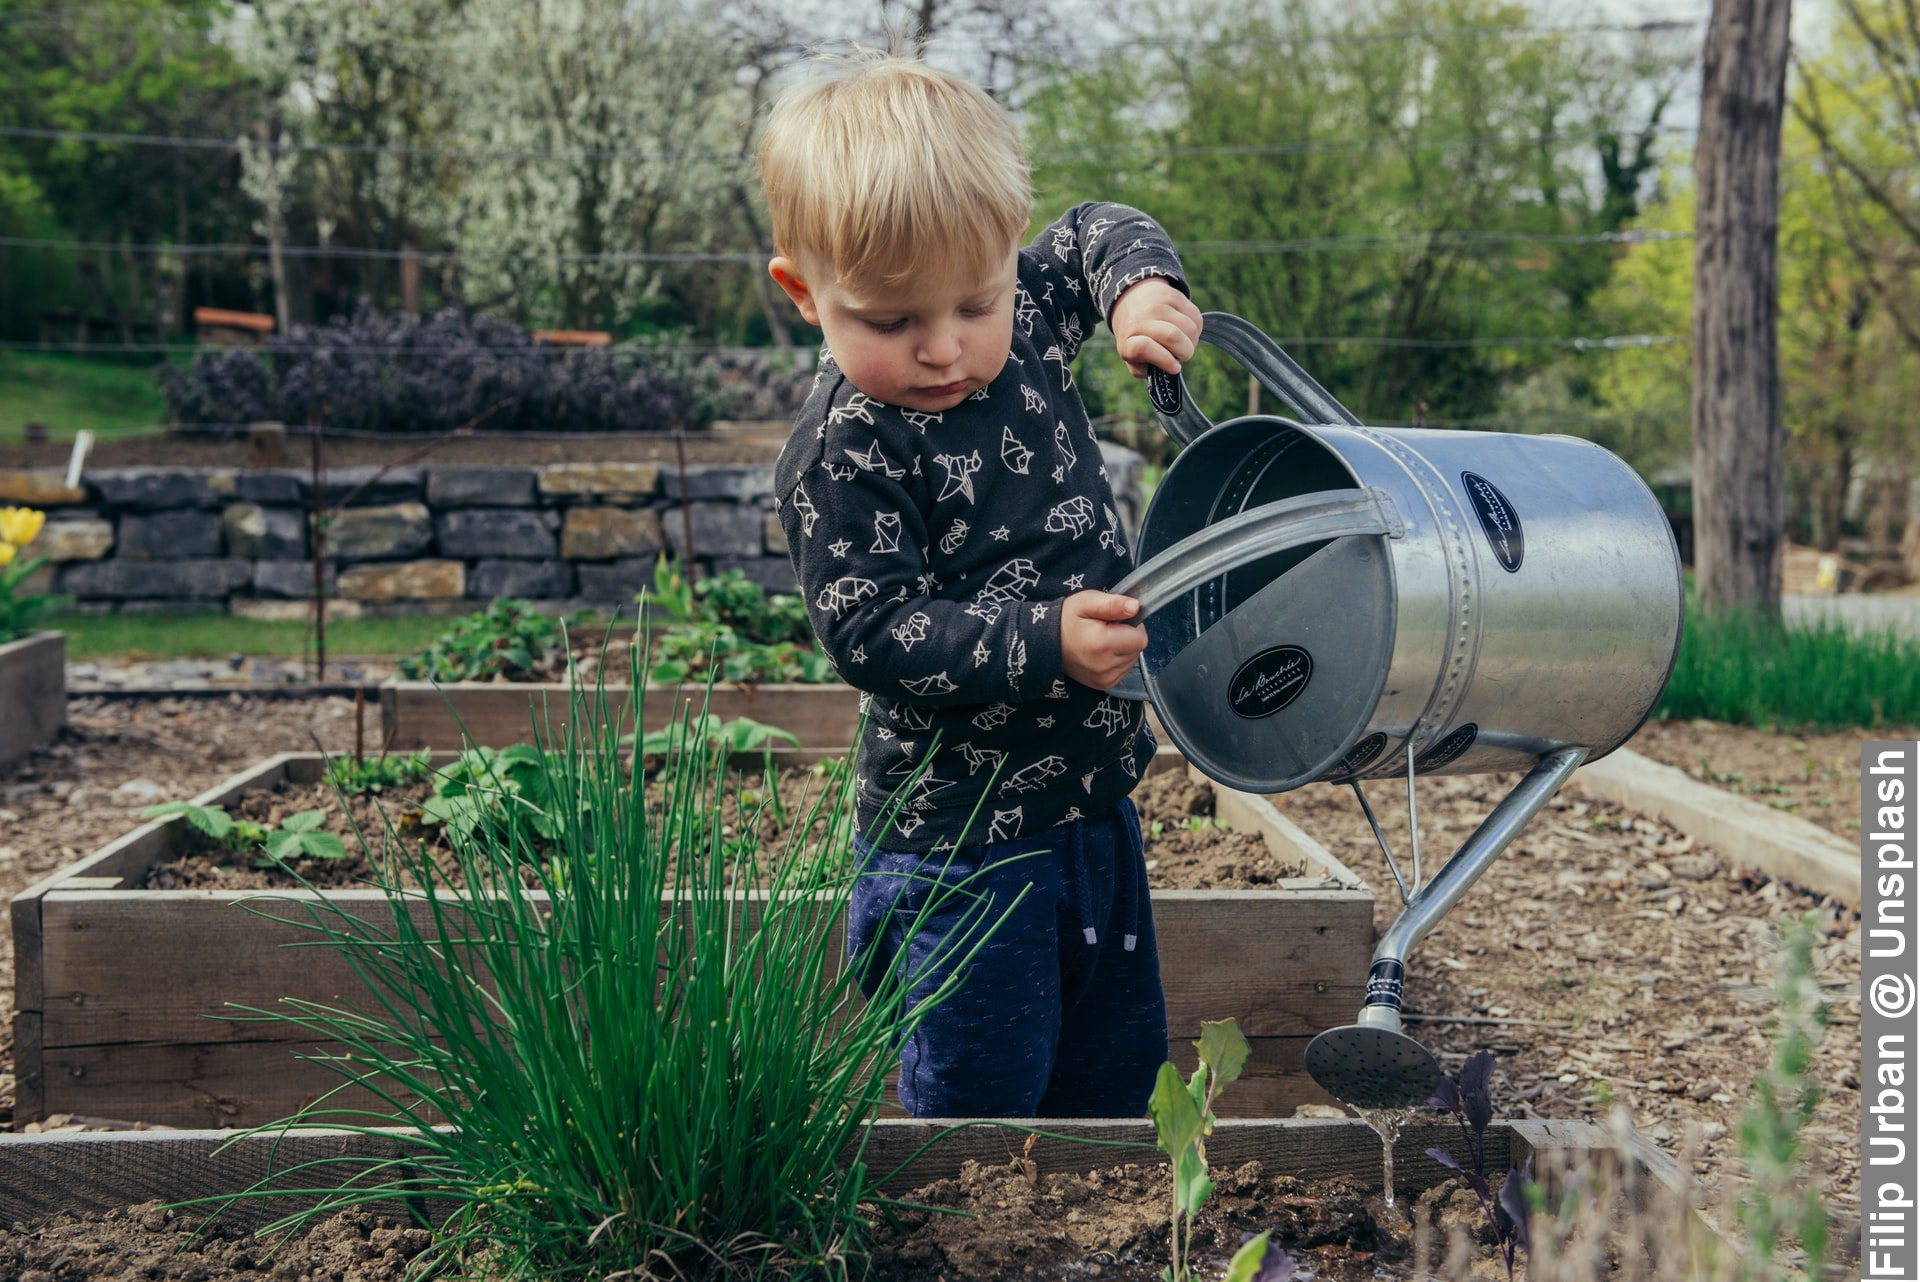 Little Boy Gardening Outdoors with a watering can during family activities